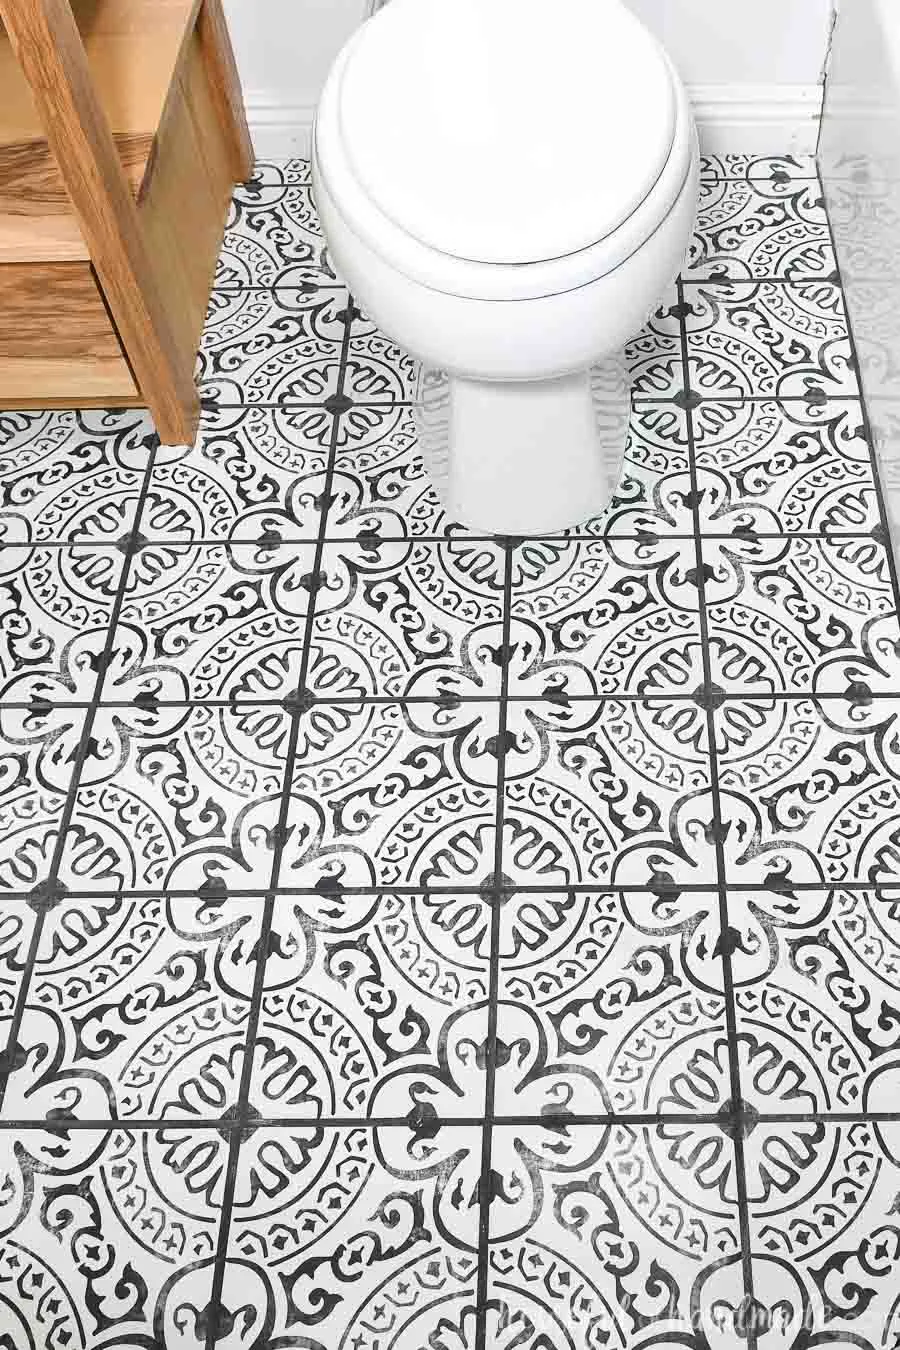 Laying Floor Tiles In A Small Bathroom, How Far Apart Should Tiles Be Spaced